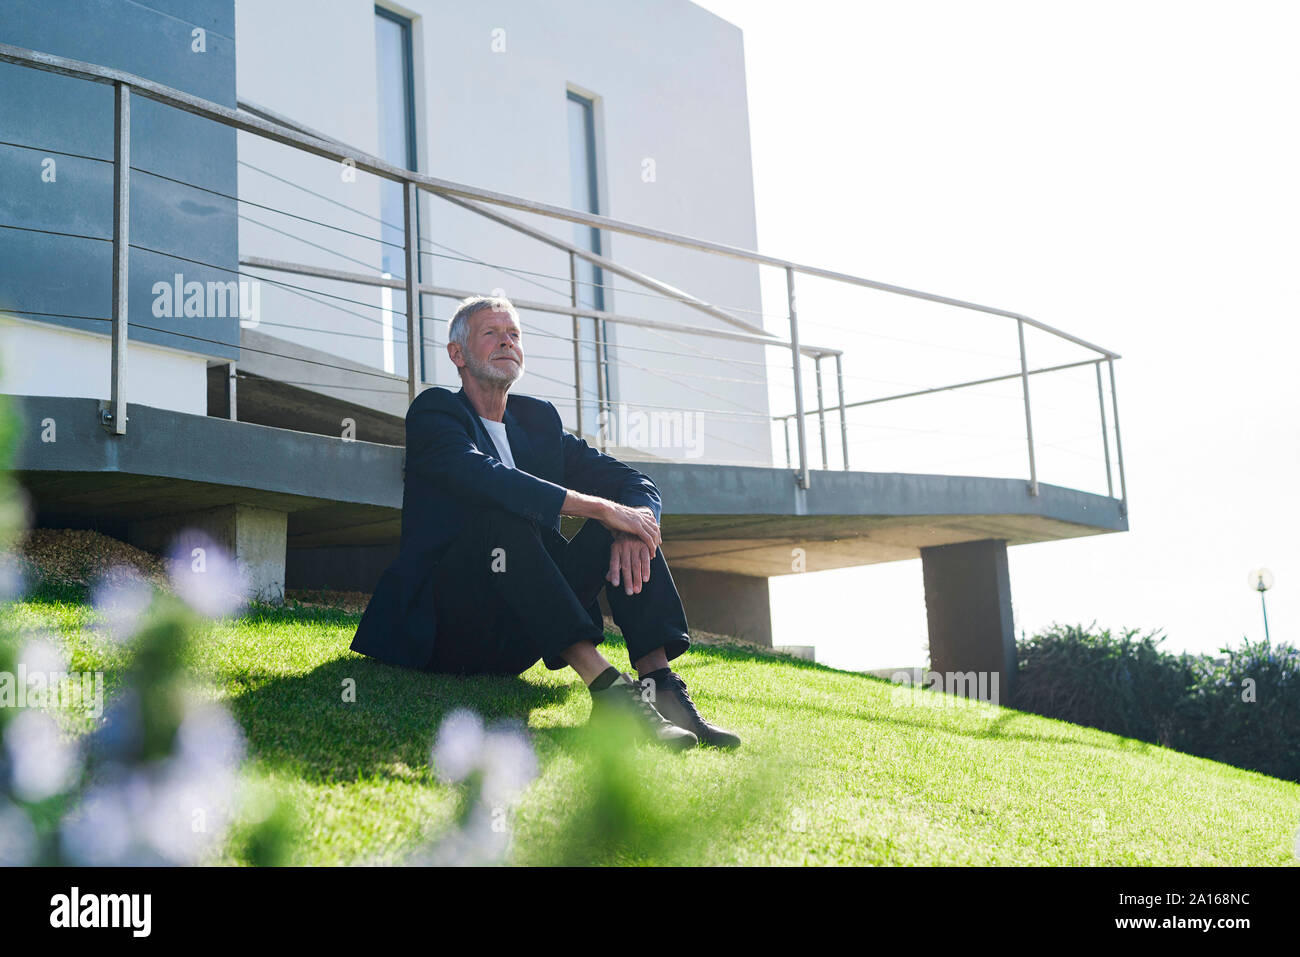 Senior businessman sitting on lawn outside a building Stock Photo